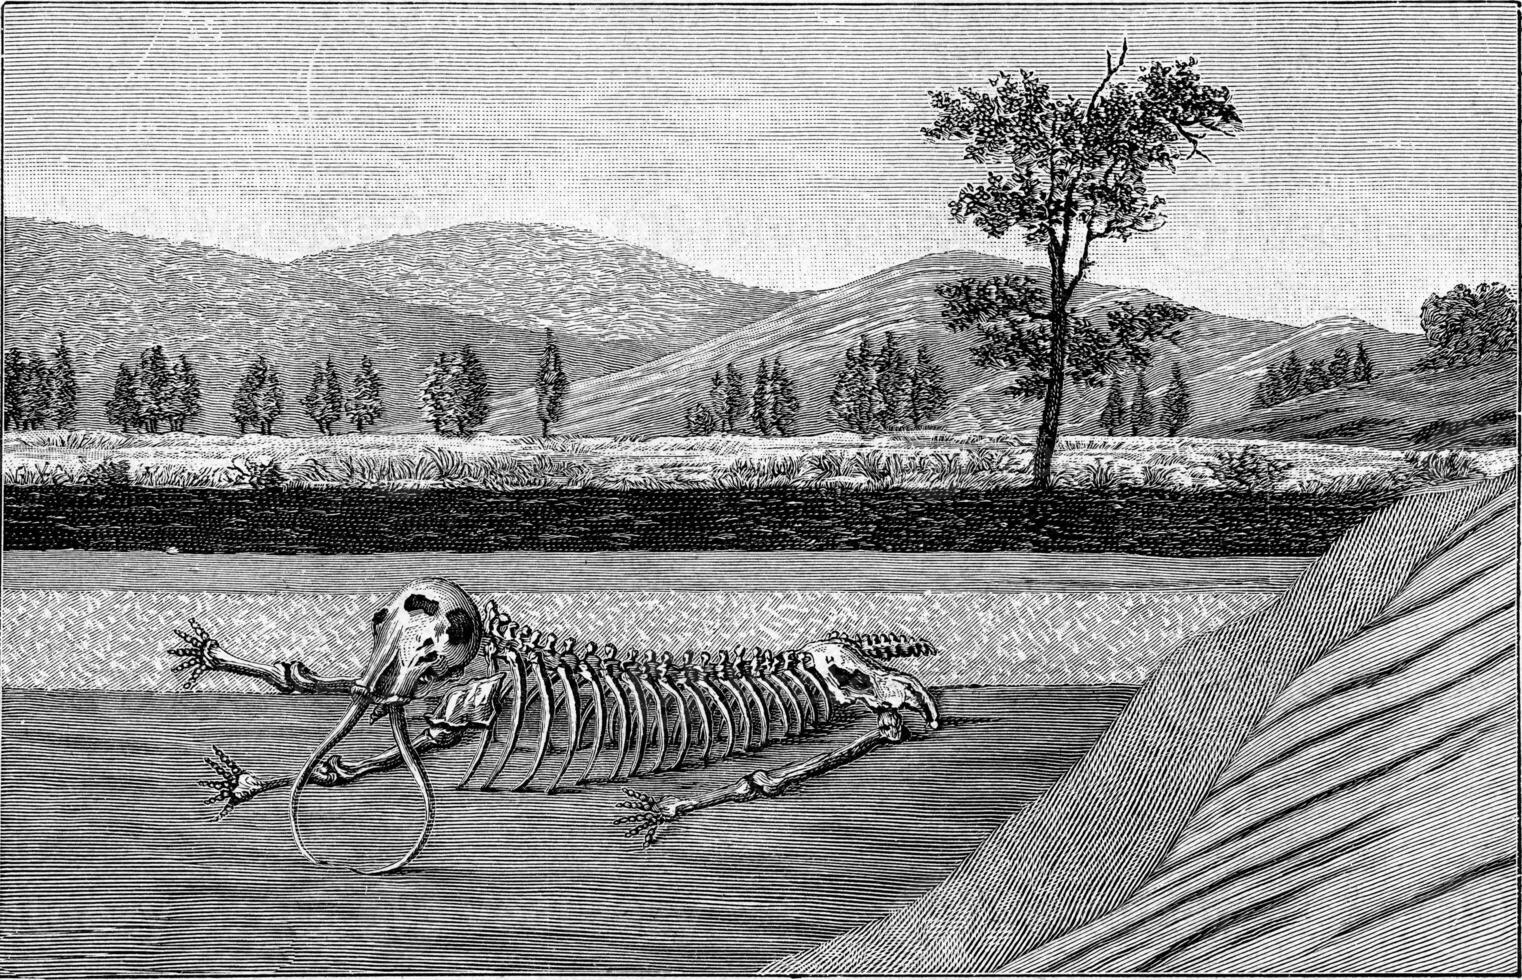 Cut through a few layers of the Earth's crust with the skeleton of a mastodon, vintage engraving. photo